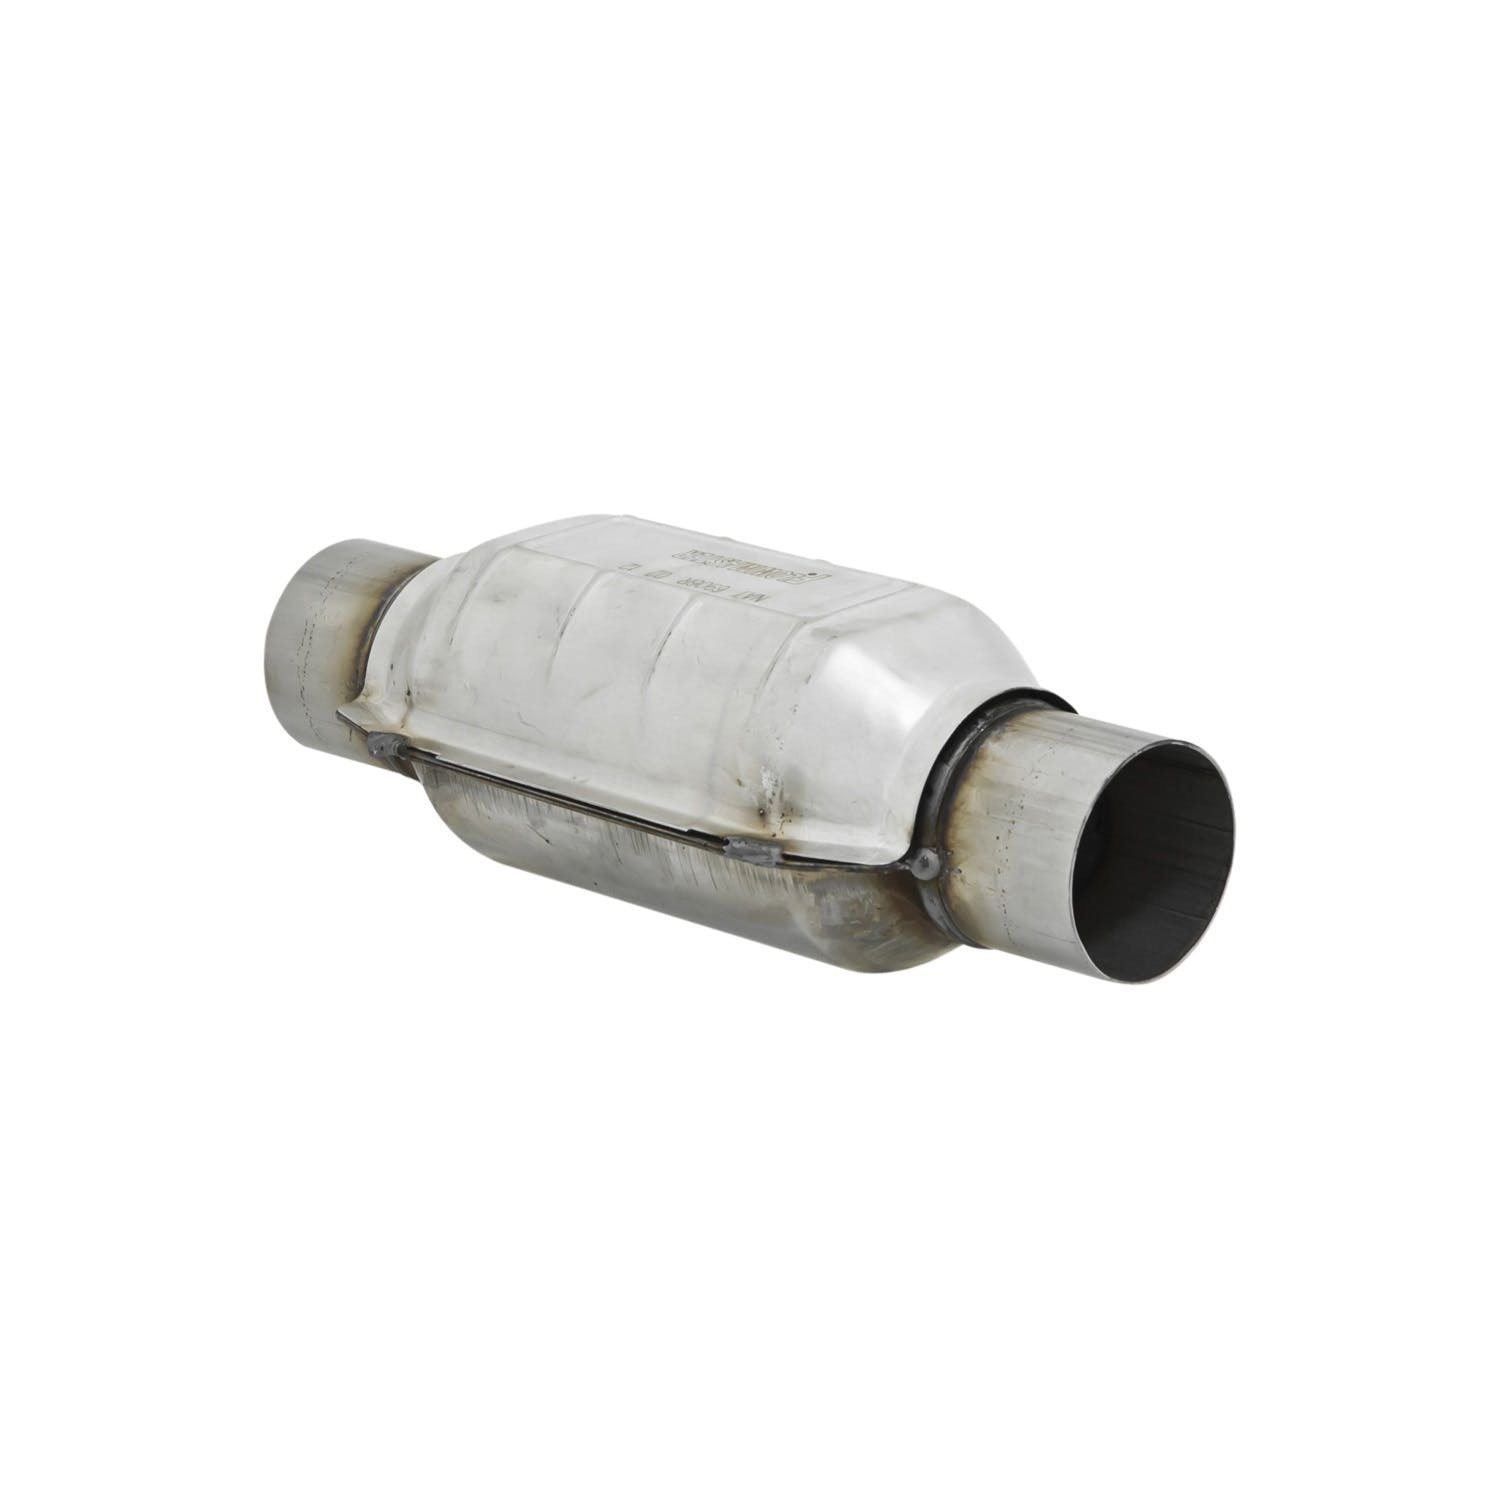 Flowmaster Catalytic Converters 2220120 Catalytic Converter-Universal-222 Series-2.00 in. Inlet/Outlet-49 State